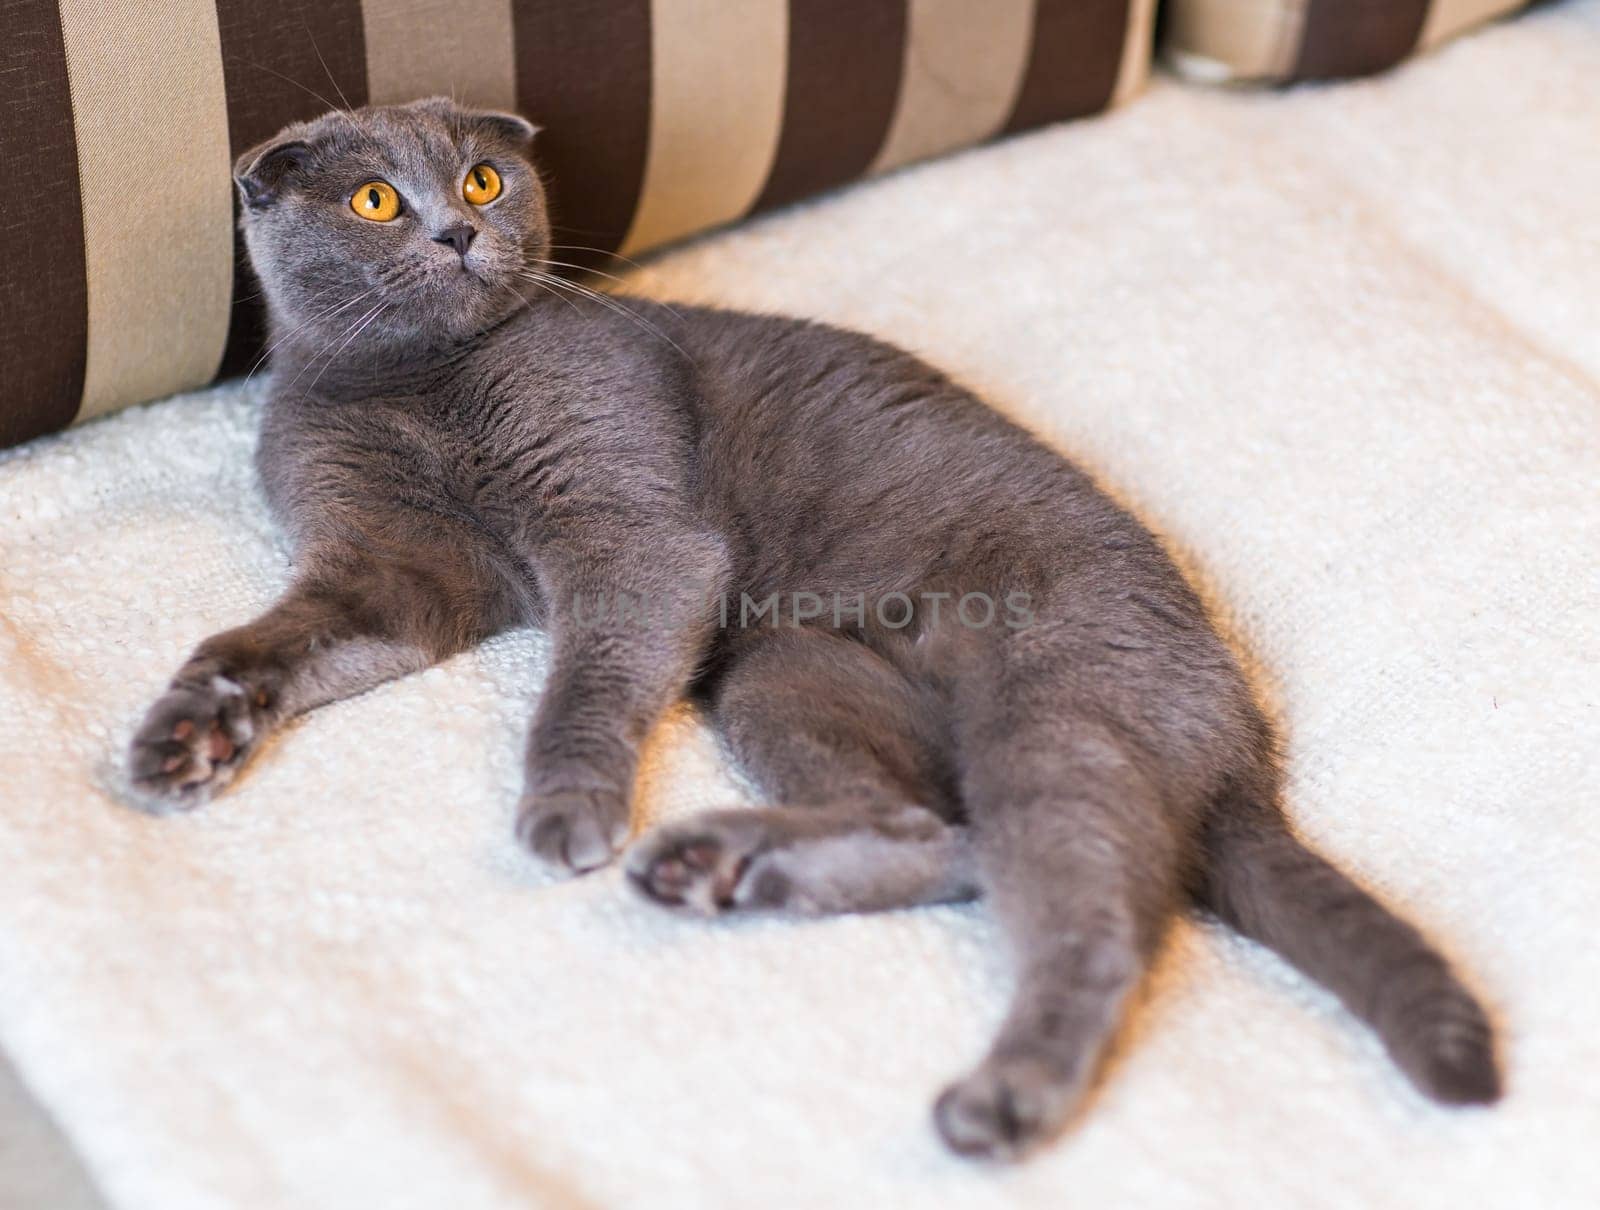 Cat relaxing on the couch in colorful blur background, cute funny cat close up, elaxing cat, cat resting, cat playing at home